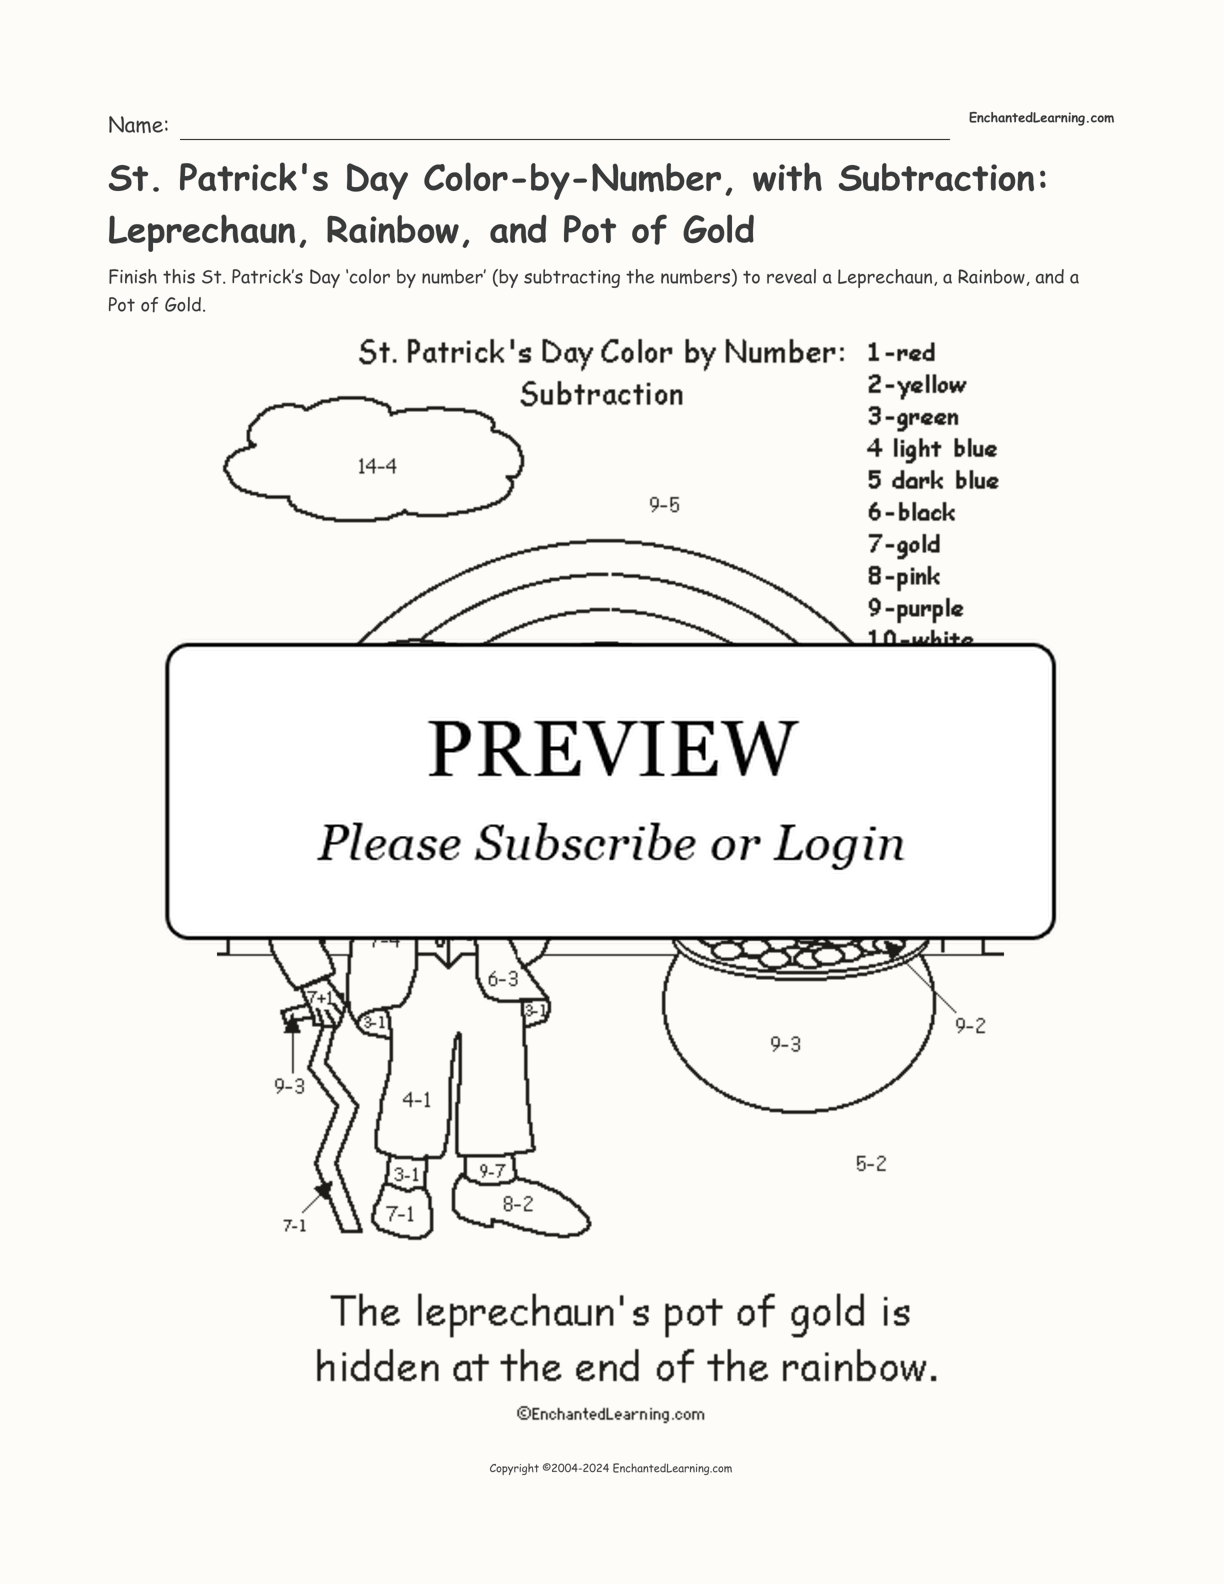 St. Patrick's Day Color-by-Number, with Subtraction: Leprechaun, Rainbow, and Pot of Gold interactive printout page 1